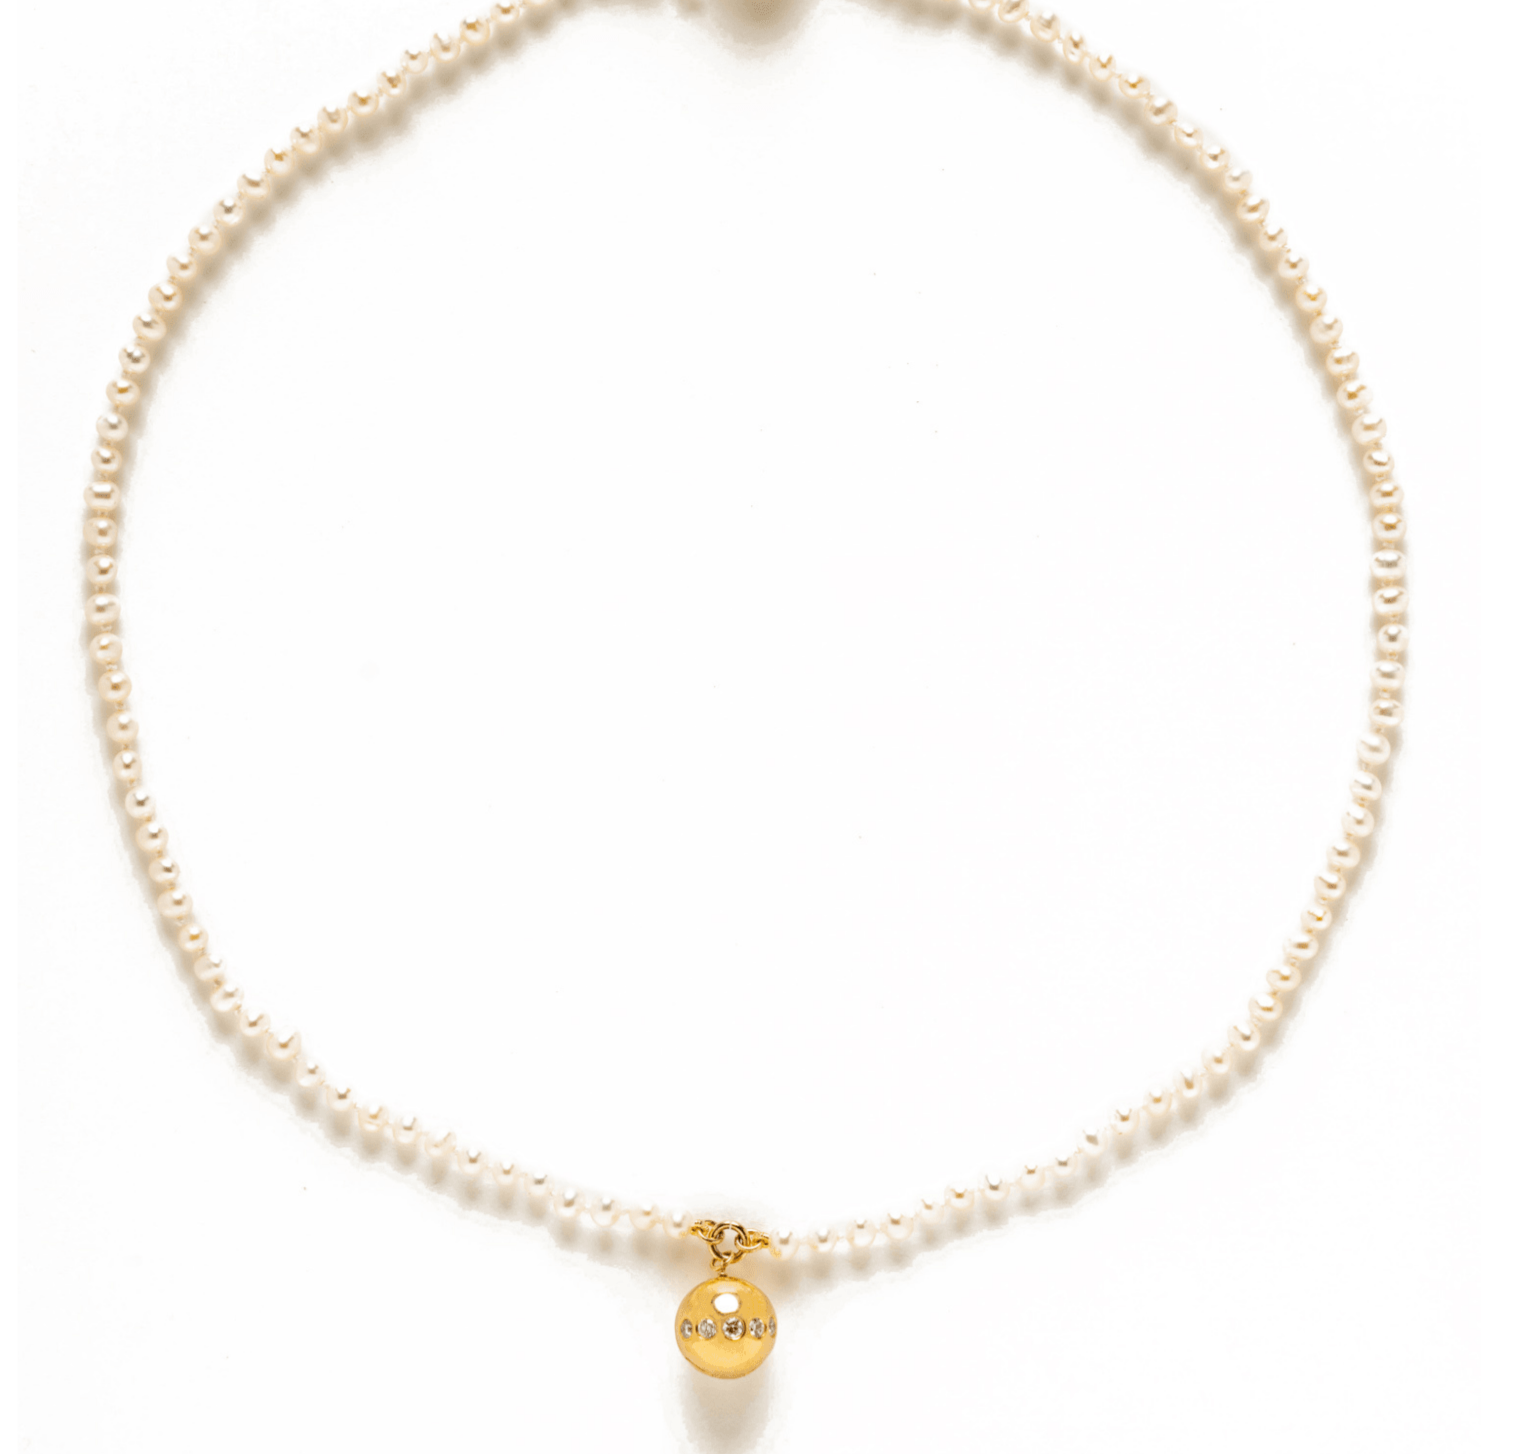 Buy Simple Classic Pearl Necklace Online. – Odette